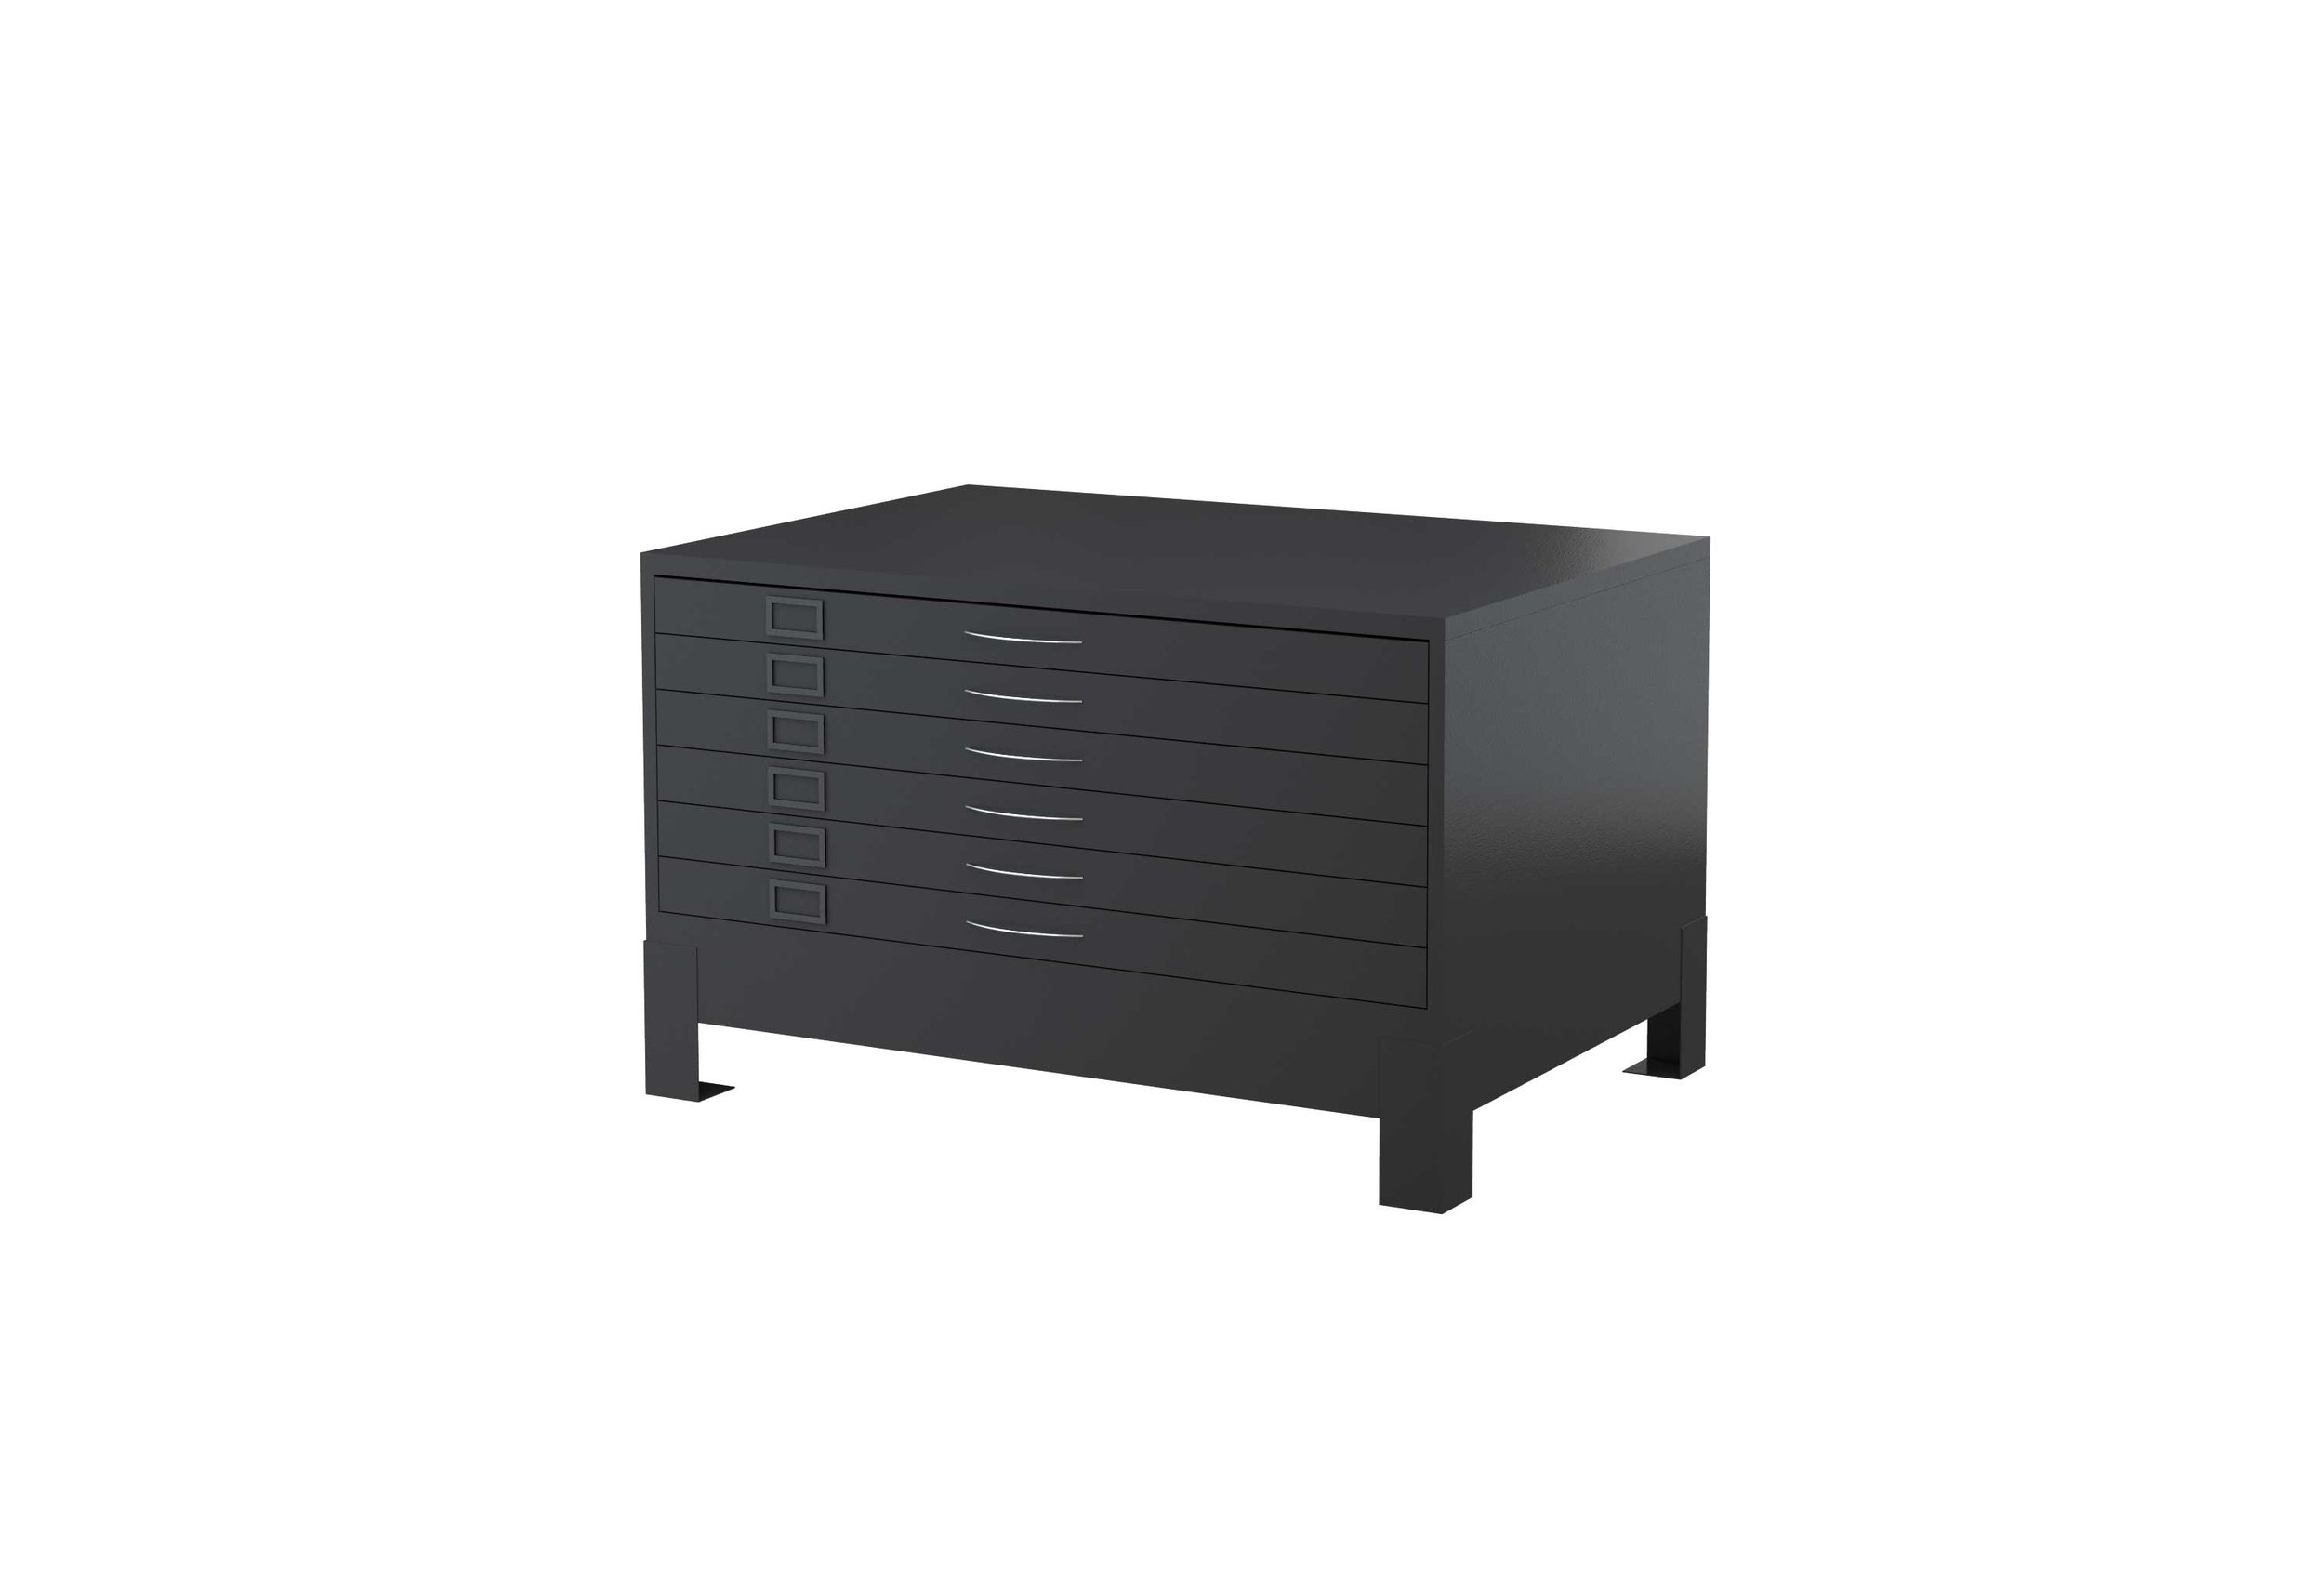 PC6D---STEELCO-6-Drawer-Plan-Cabinet-880H-x--1375W-x-960D-(Incl-Stand)-GR_web.jpg